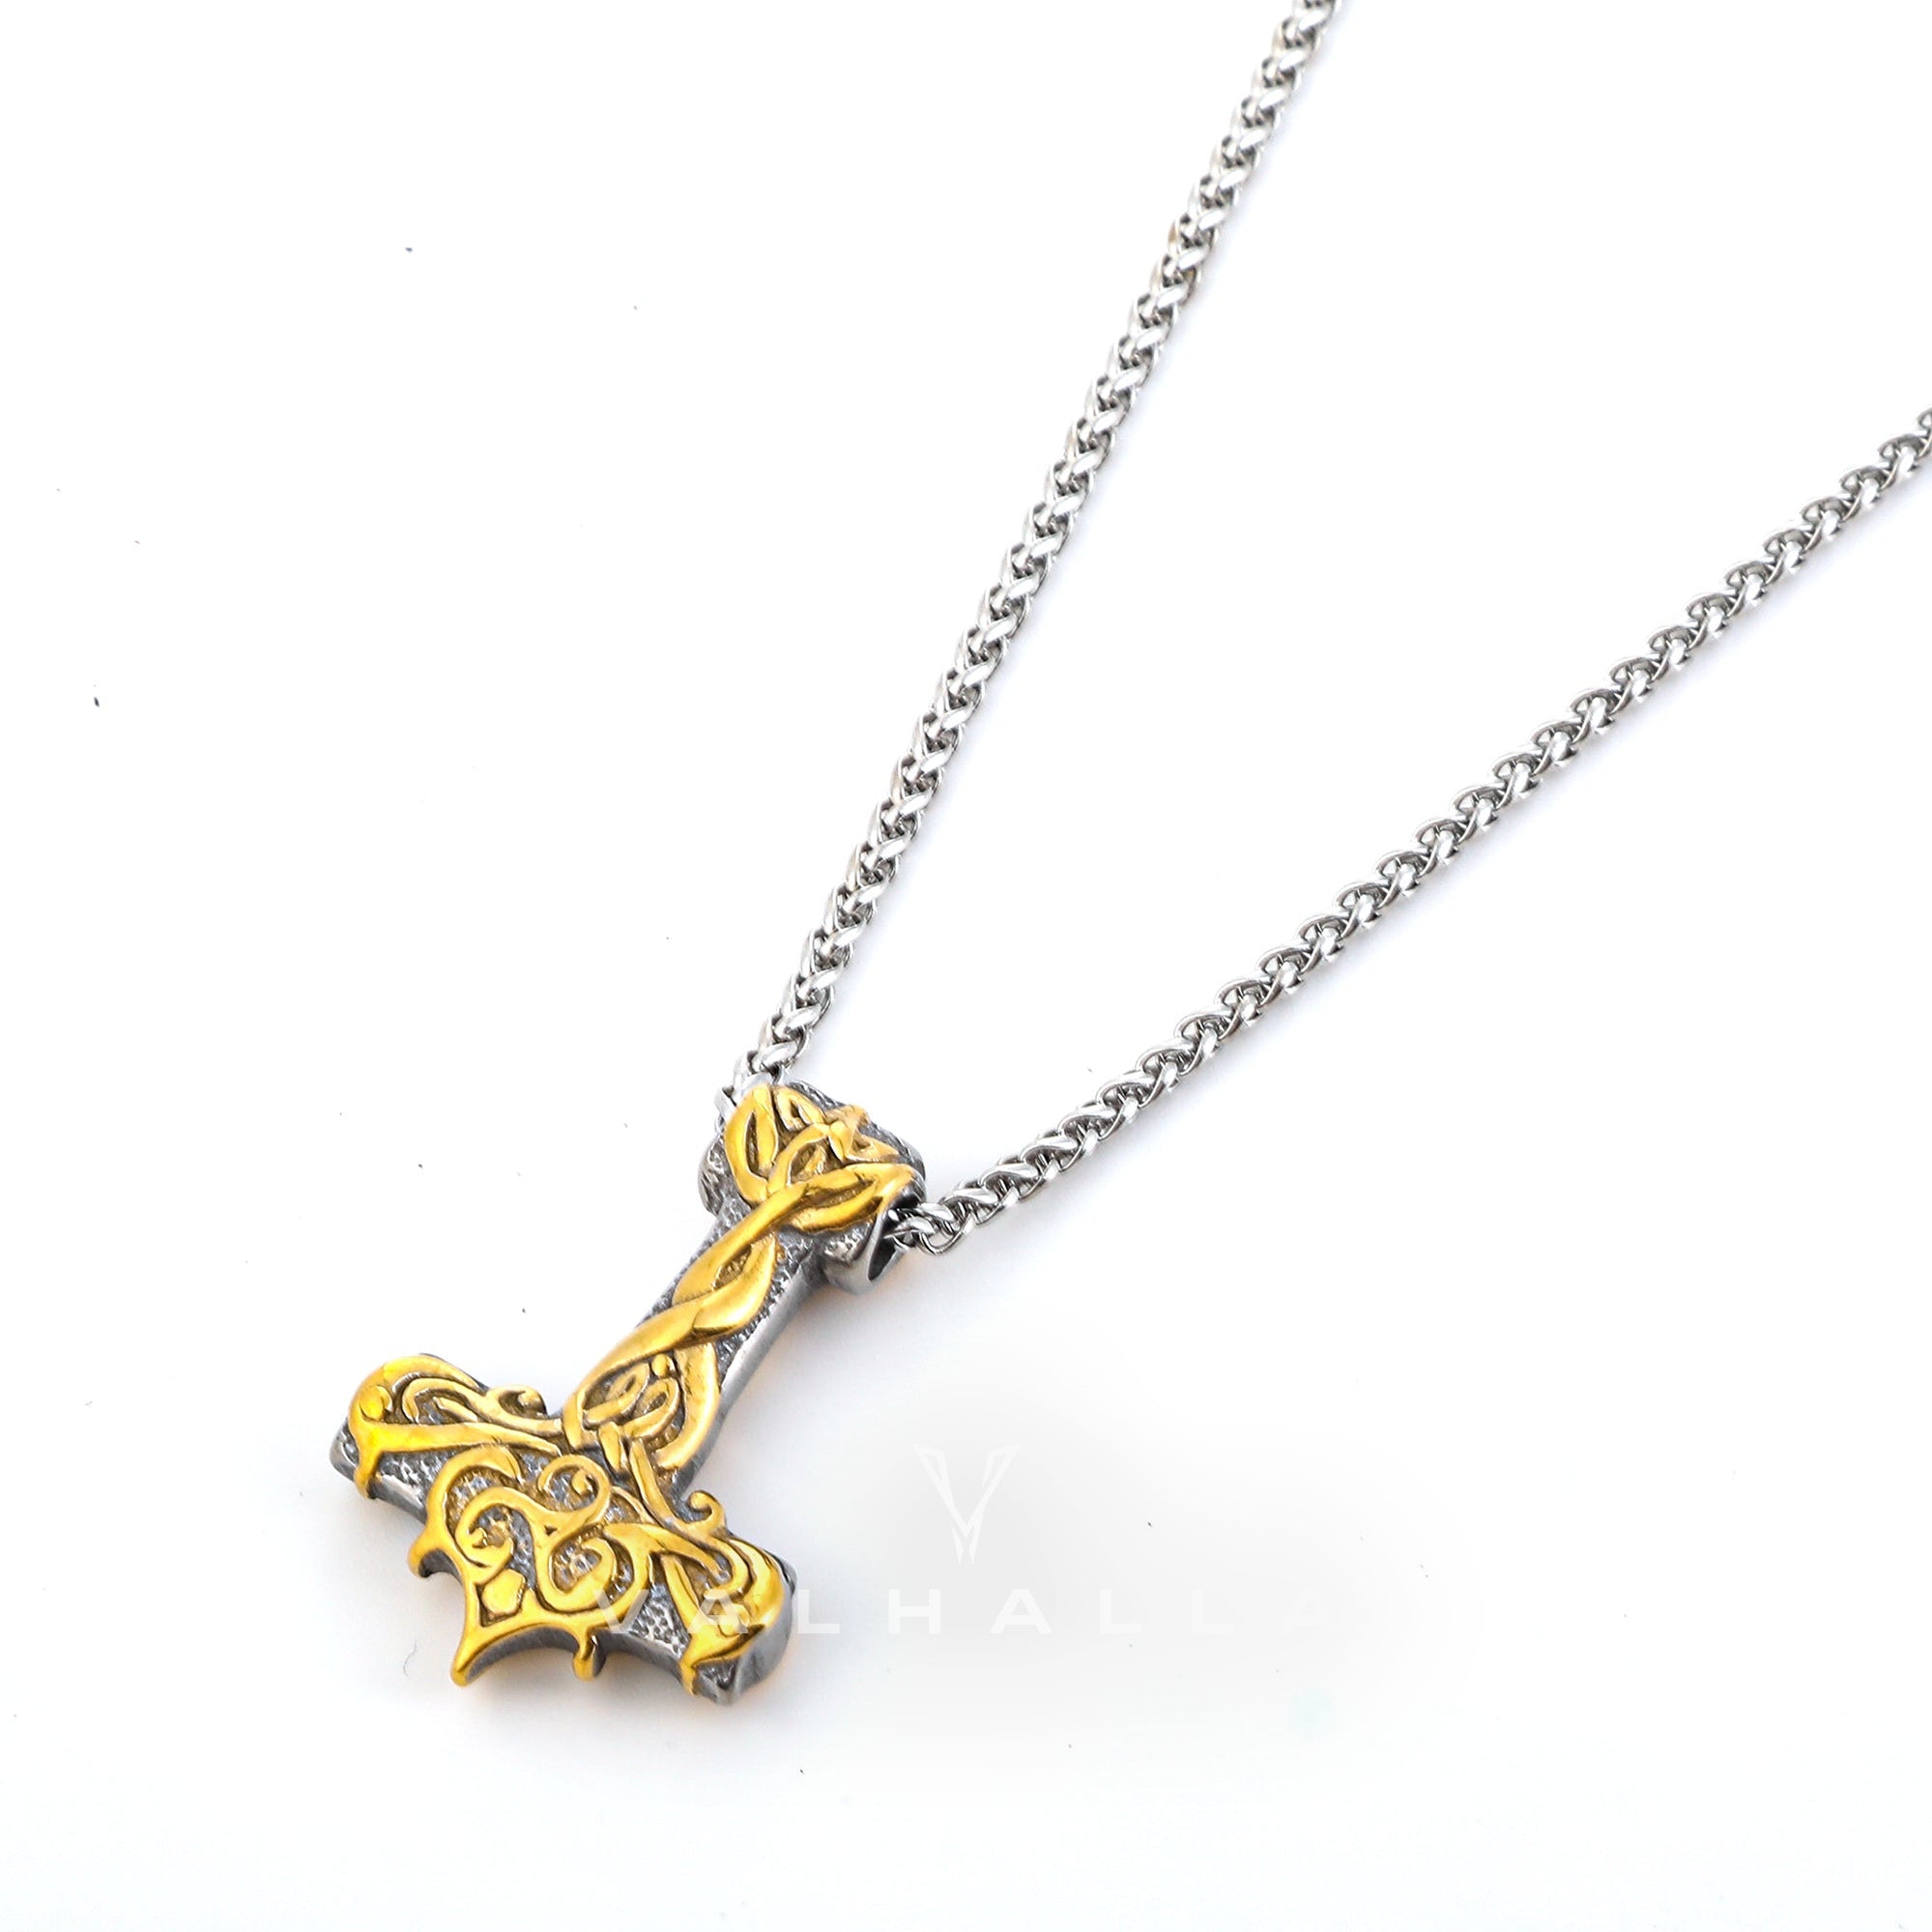 Handcrafted Stainless Steel Ornate Thor's Hammer Necklace